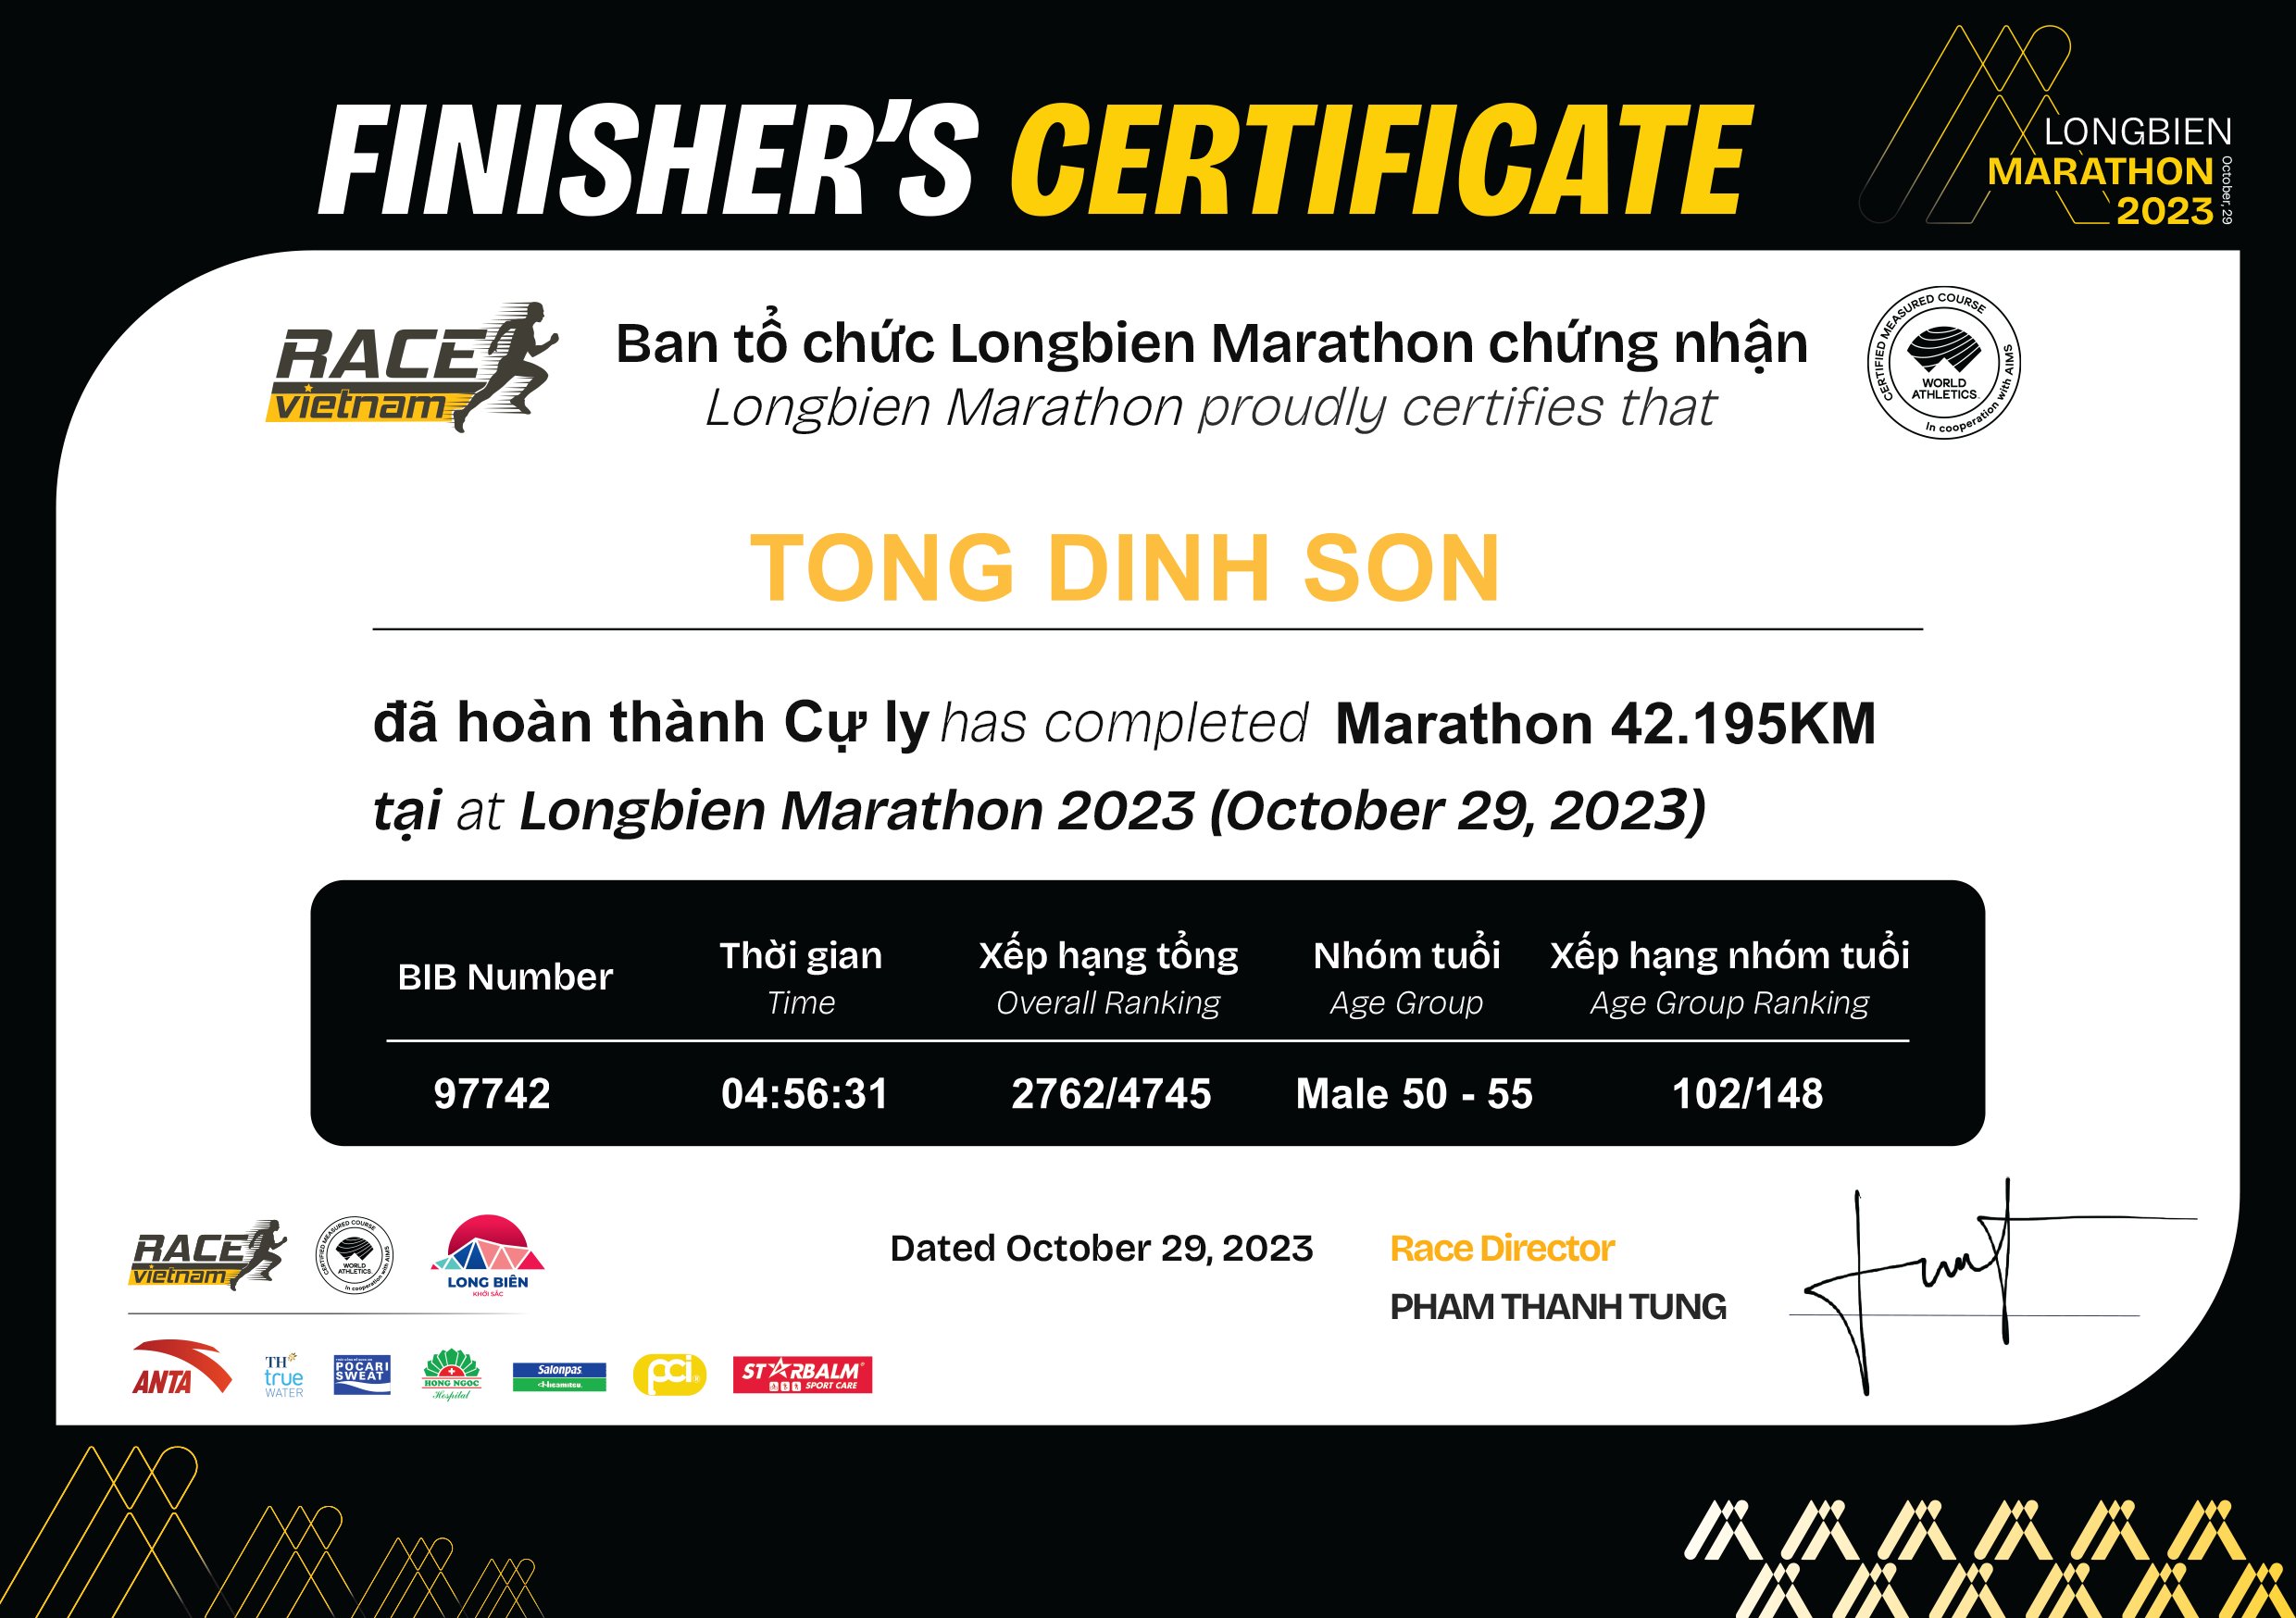 97742 - TONG DINH SON